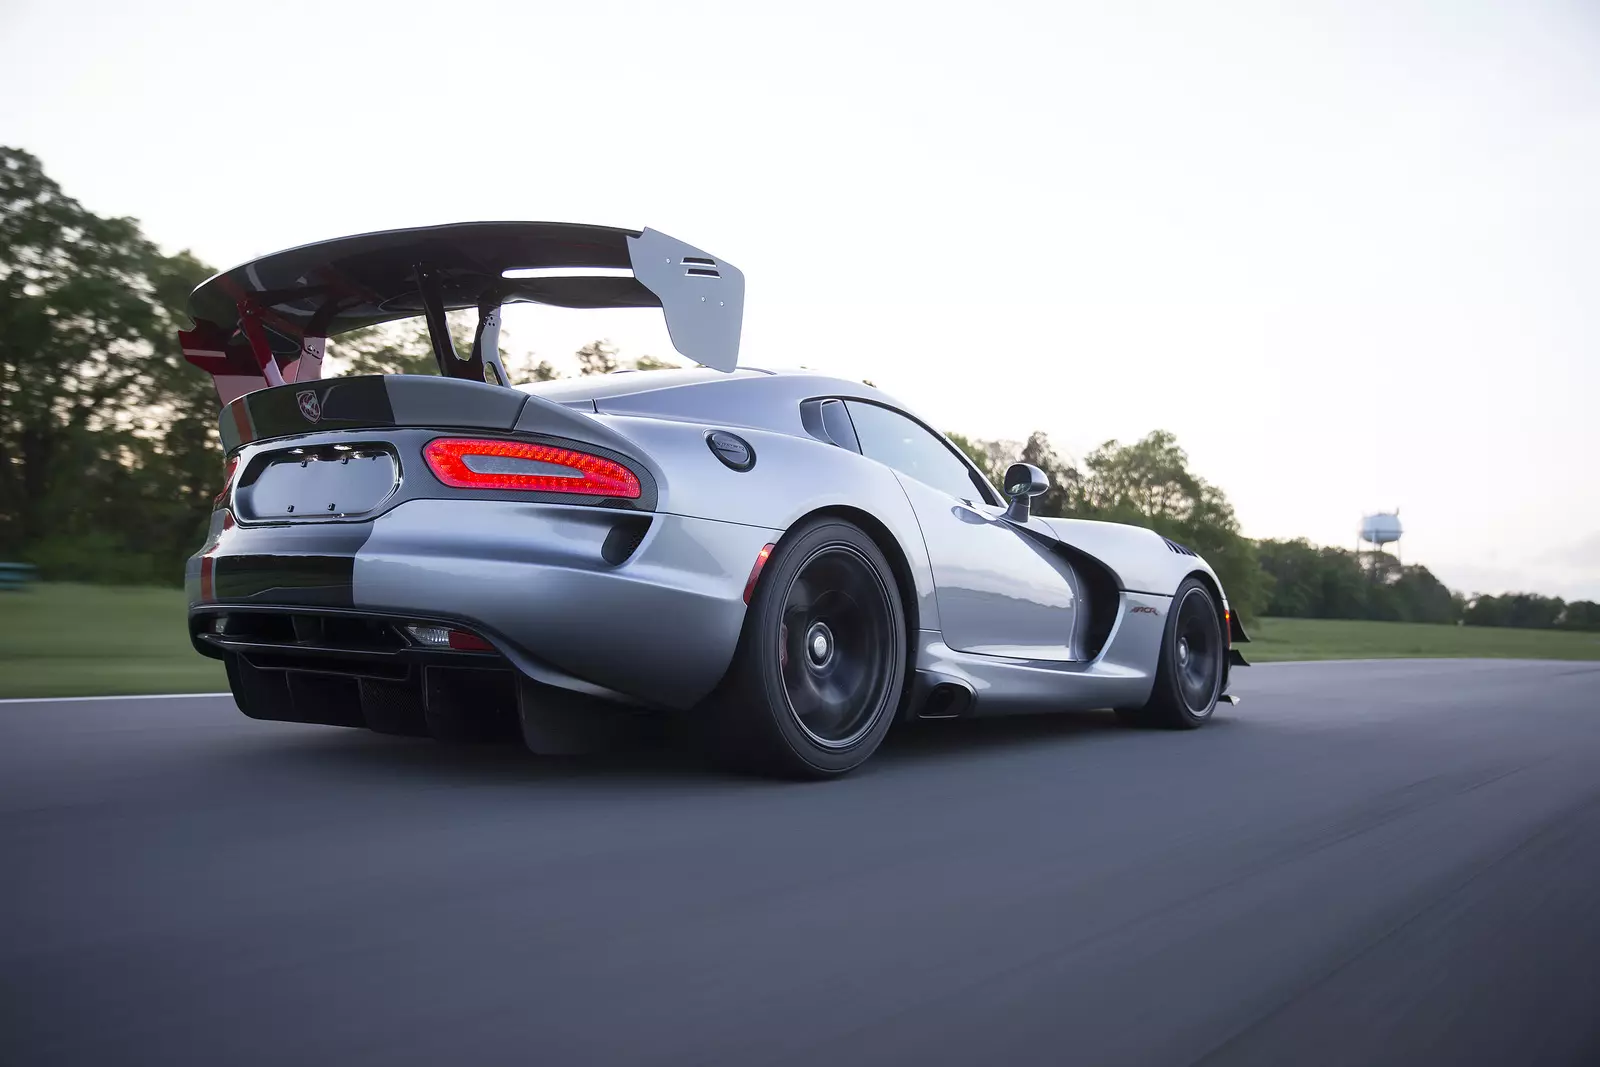 Dodge Viper fans gather to try to recover Nürburgring record